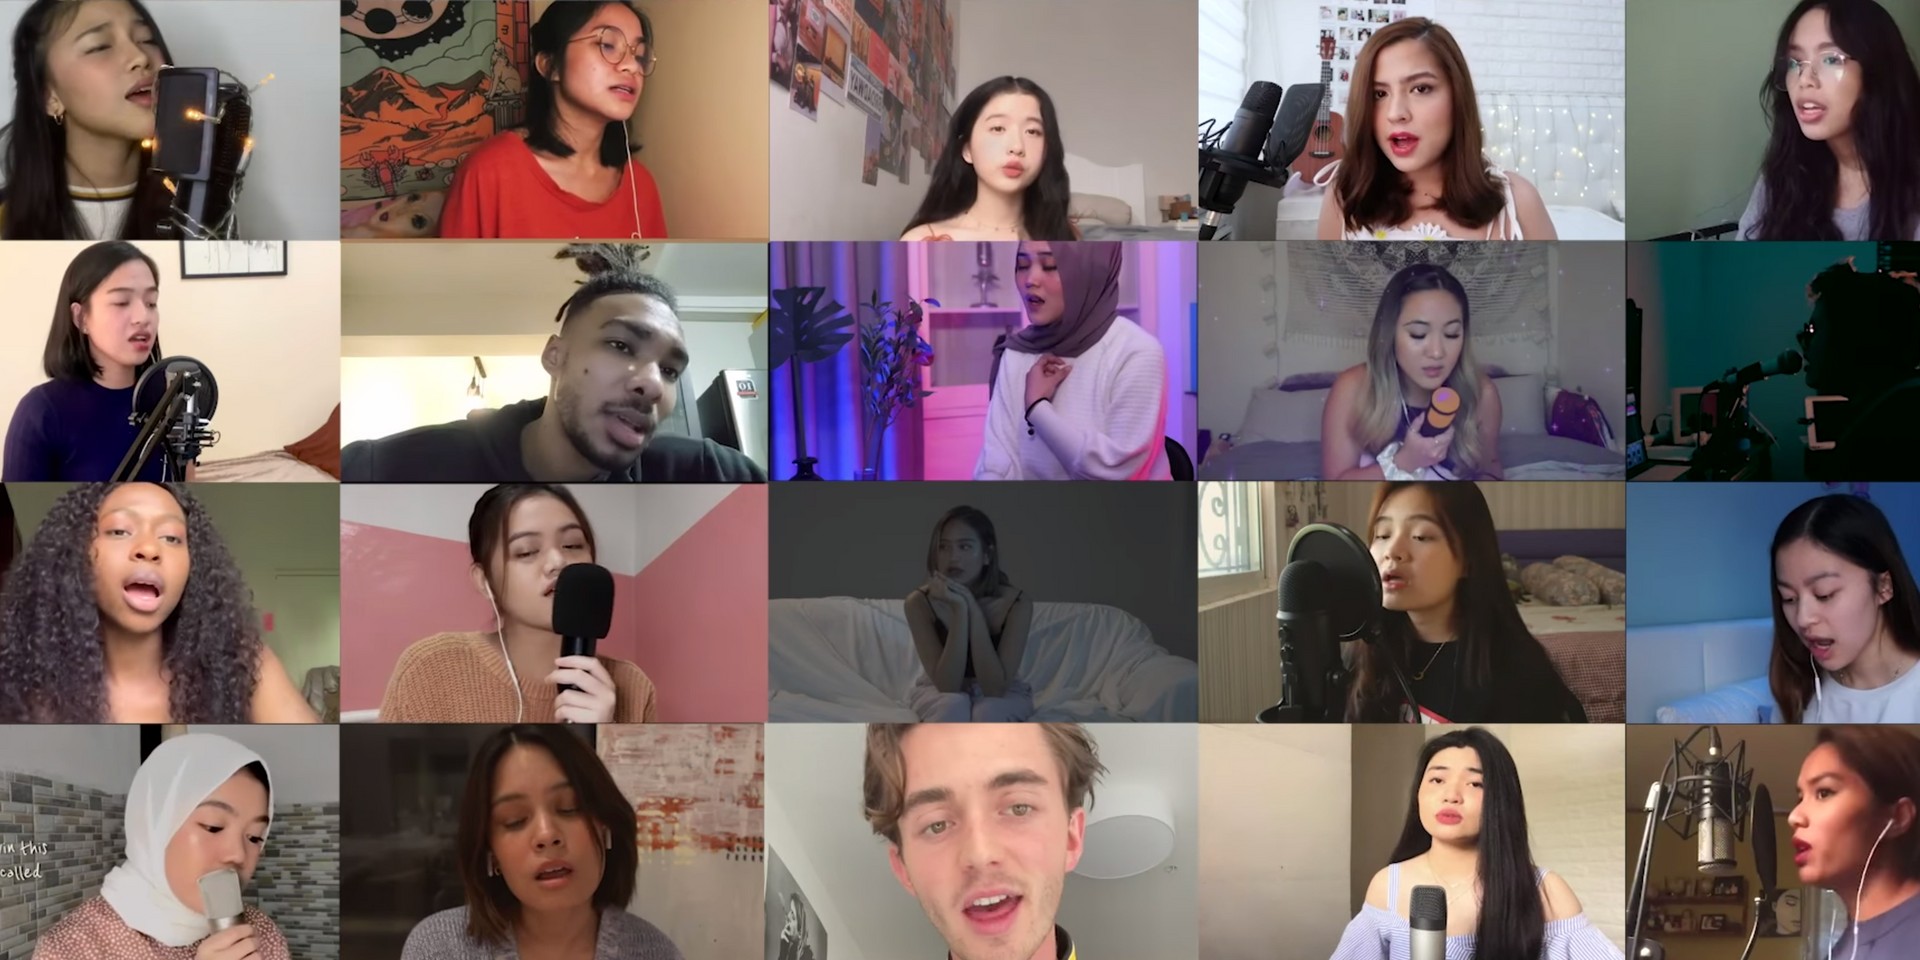 Fans around the world cover NIKI's 'Lose': Fern., Anneth Delliecia, Leila Alcasid, Greyson Chance, Tiffany Day, and more – watch